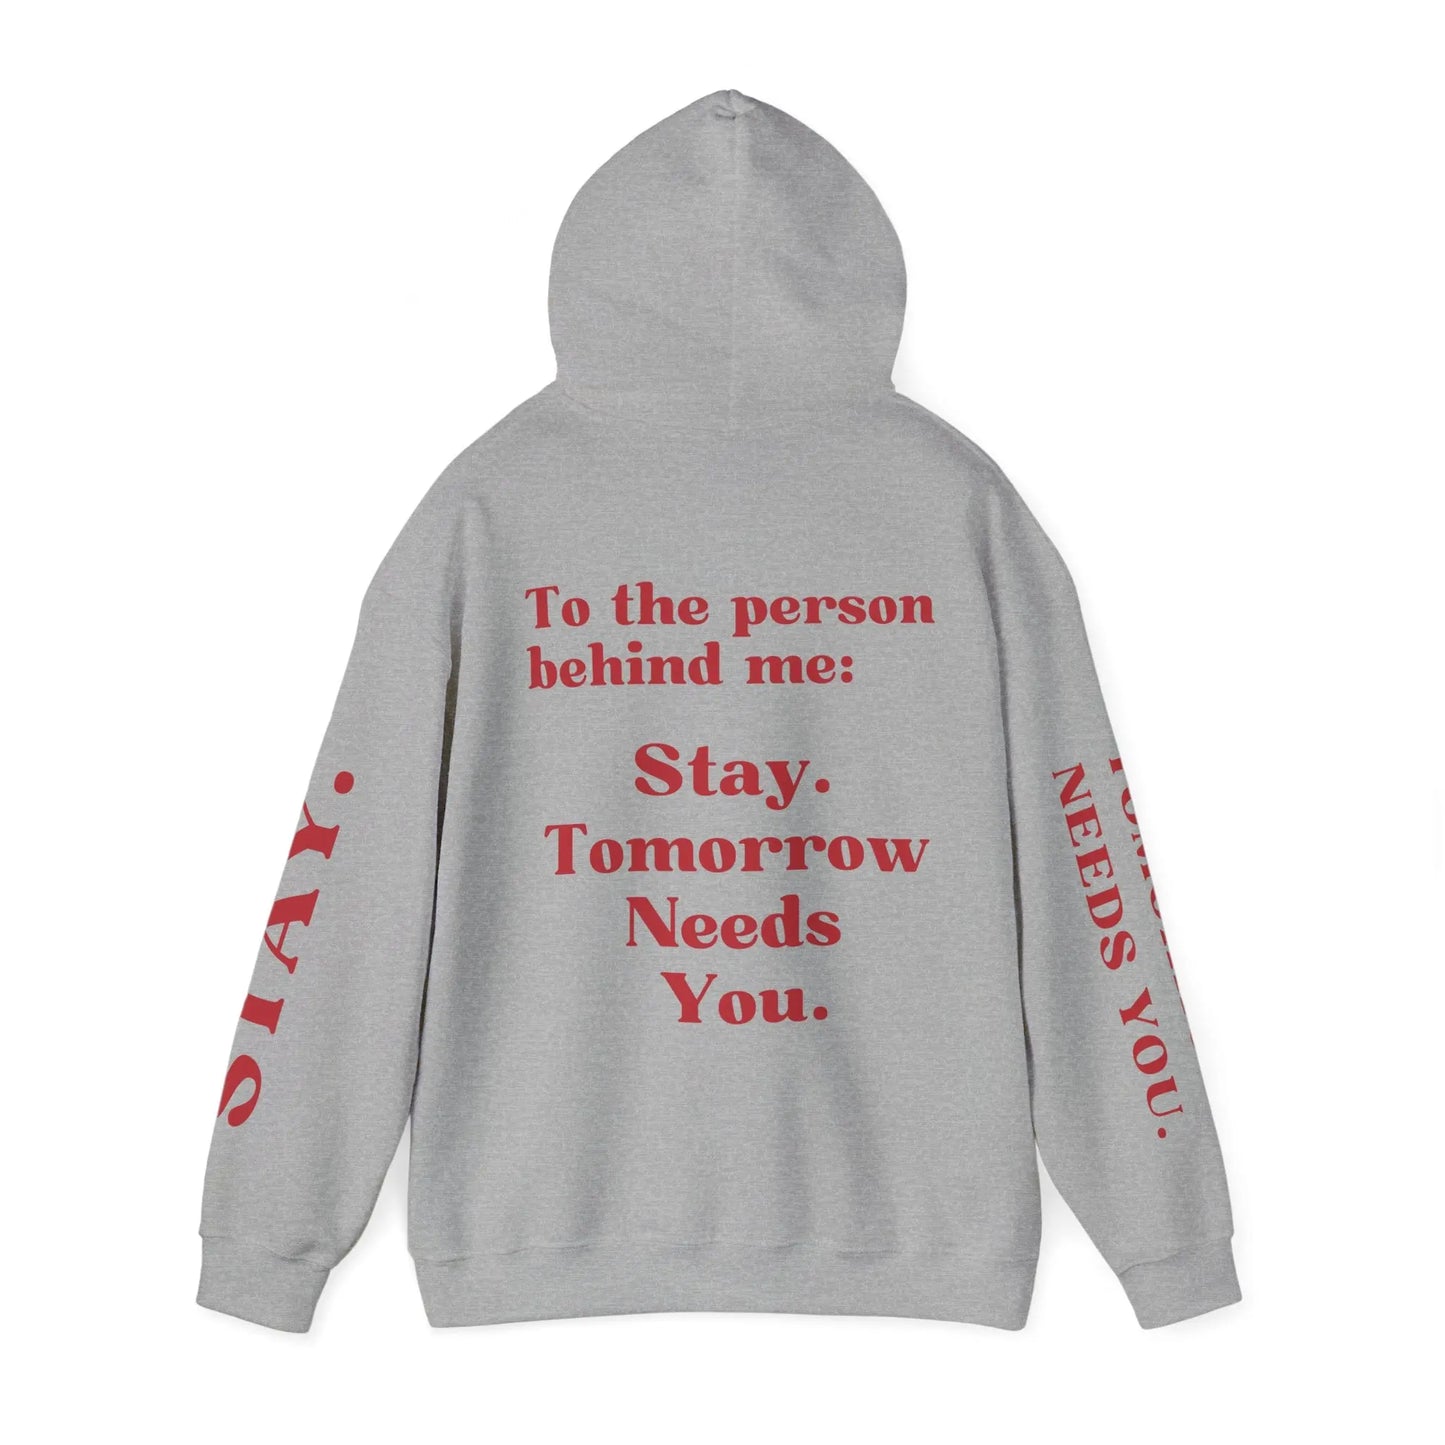 To The Person Behind Me: "Stay Tomorrow Needs You" Hooded Sweatshirt Mental Health Awareness Suicide Prevention Mothers Day Fathers Day Gift Veterans Support Military Gift